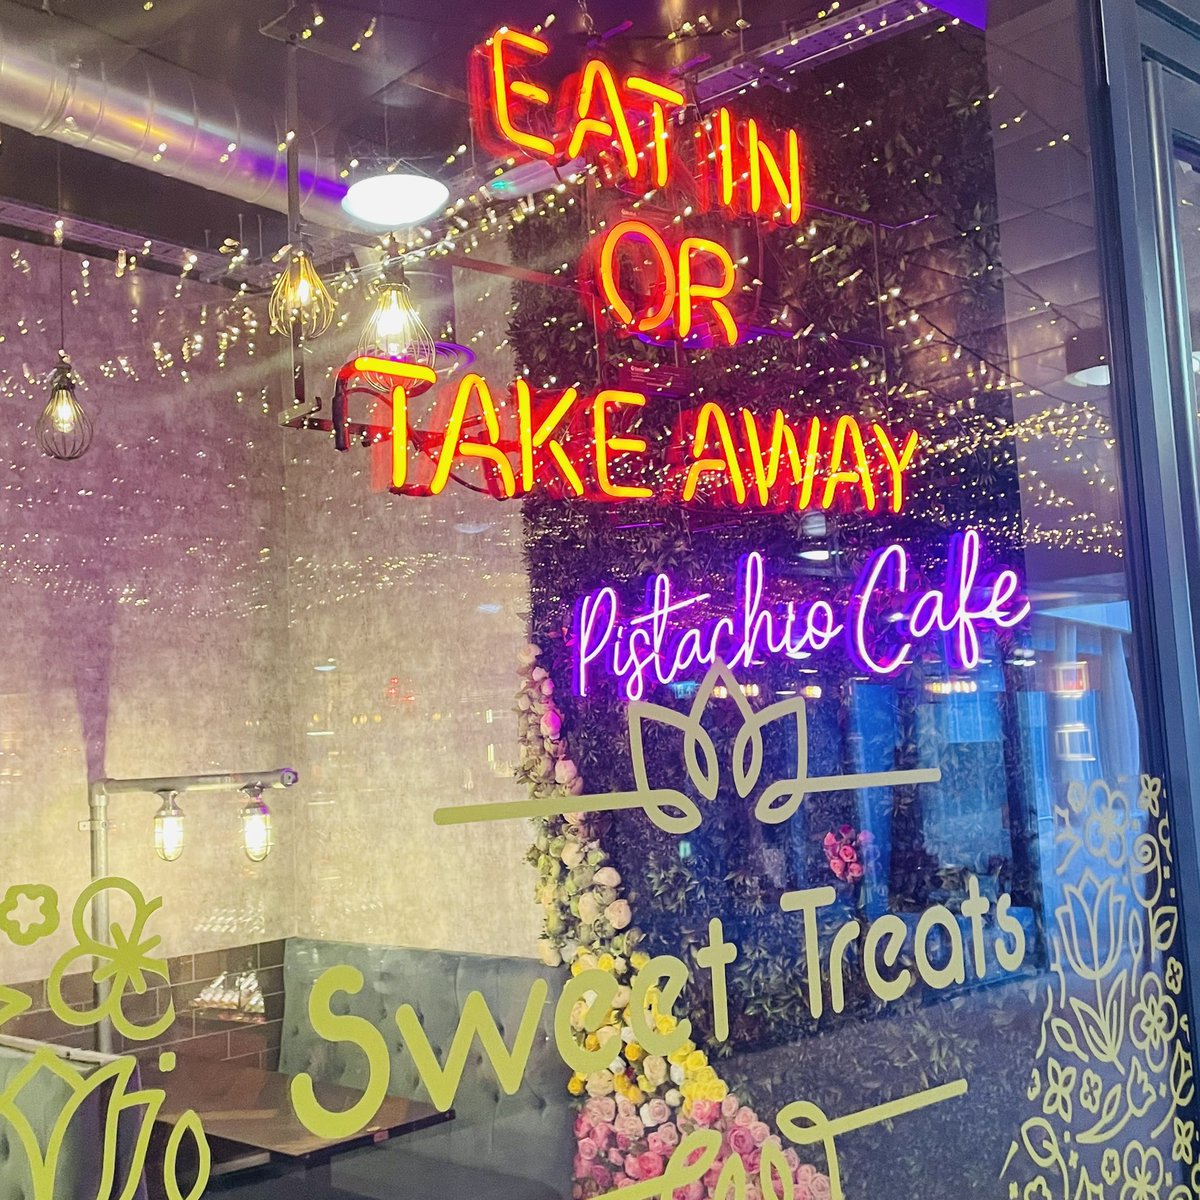 test Twitter Media - 🎈🍦🍰☕Treat for the Half Term?☕🍰🍦🎈
Pistachio Cafe has just opened in @RiversideBdfd 
🍰3pm to 11pm, Everyday
☕A fantastic range of drinks and sweet treats, with a packed Main and also a full Vegan/Dairy Free Menu
🍦For FROZEN fans, head on down on Tuesday! https://t.co/qQx5e3lW8g